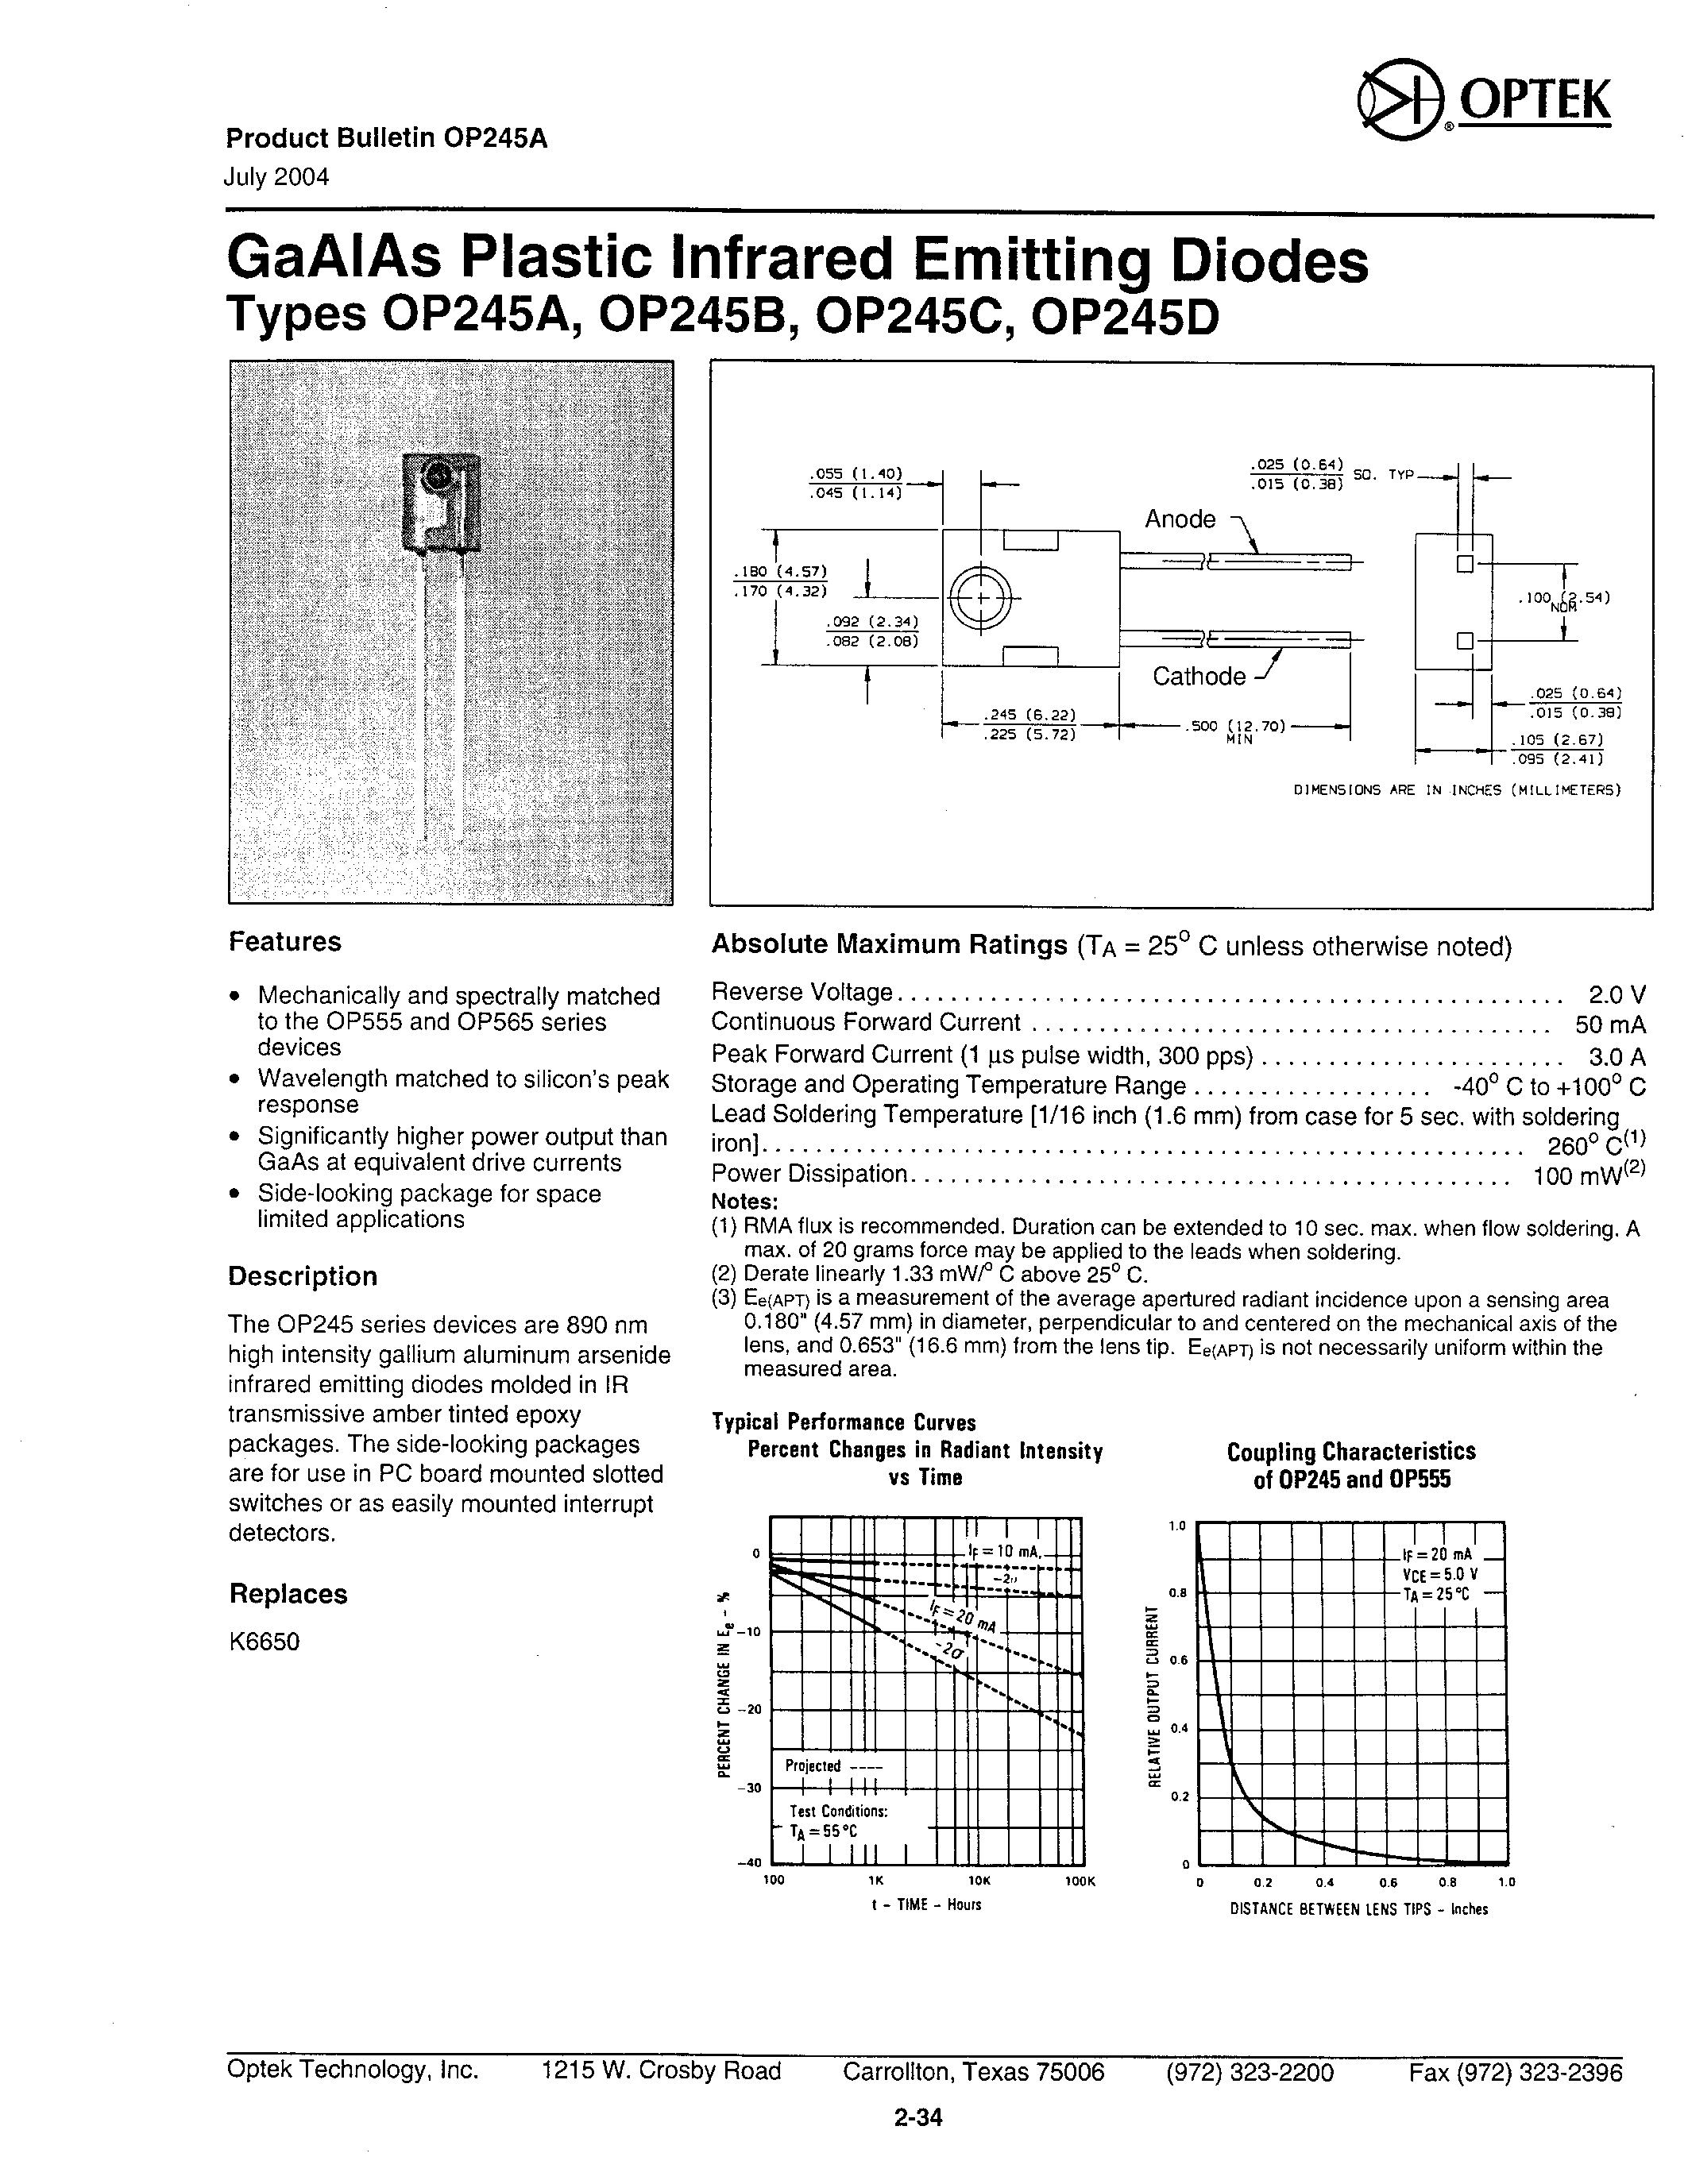 Datasheet OP245A - GAAIAS PLASTIC INFRARED EMITTING DIODES page 1